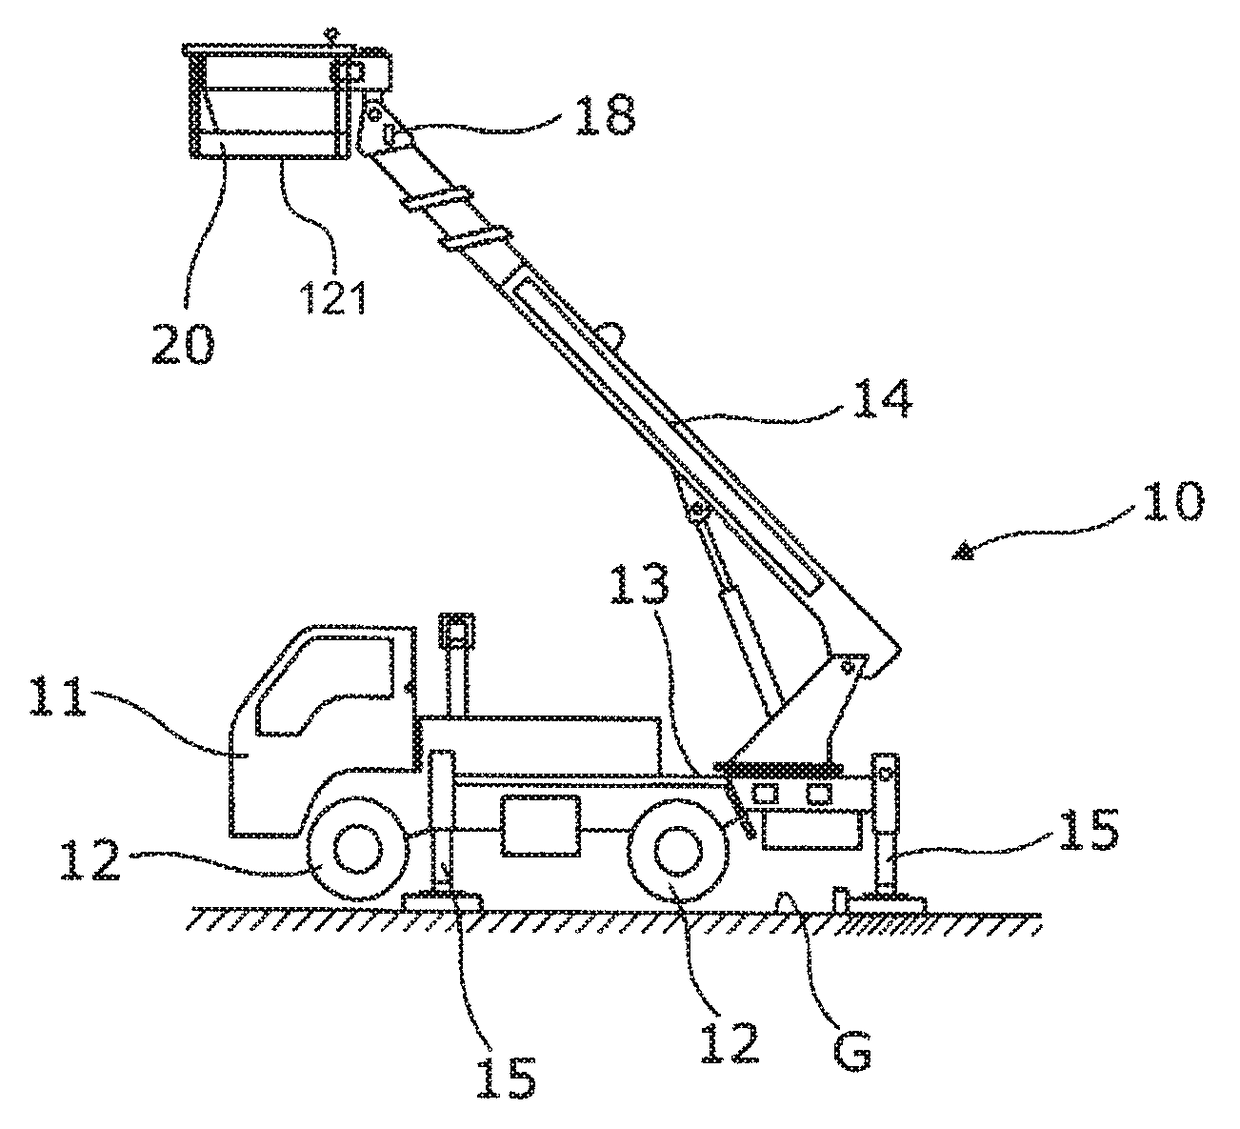 Aerial lift with safety device and alarm